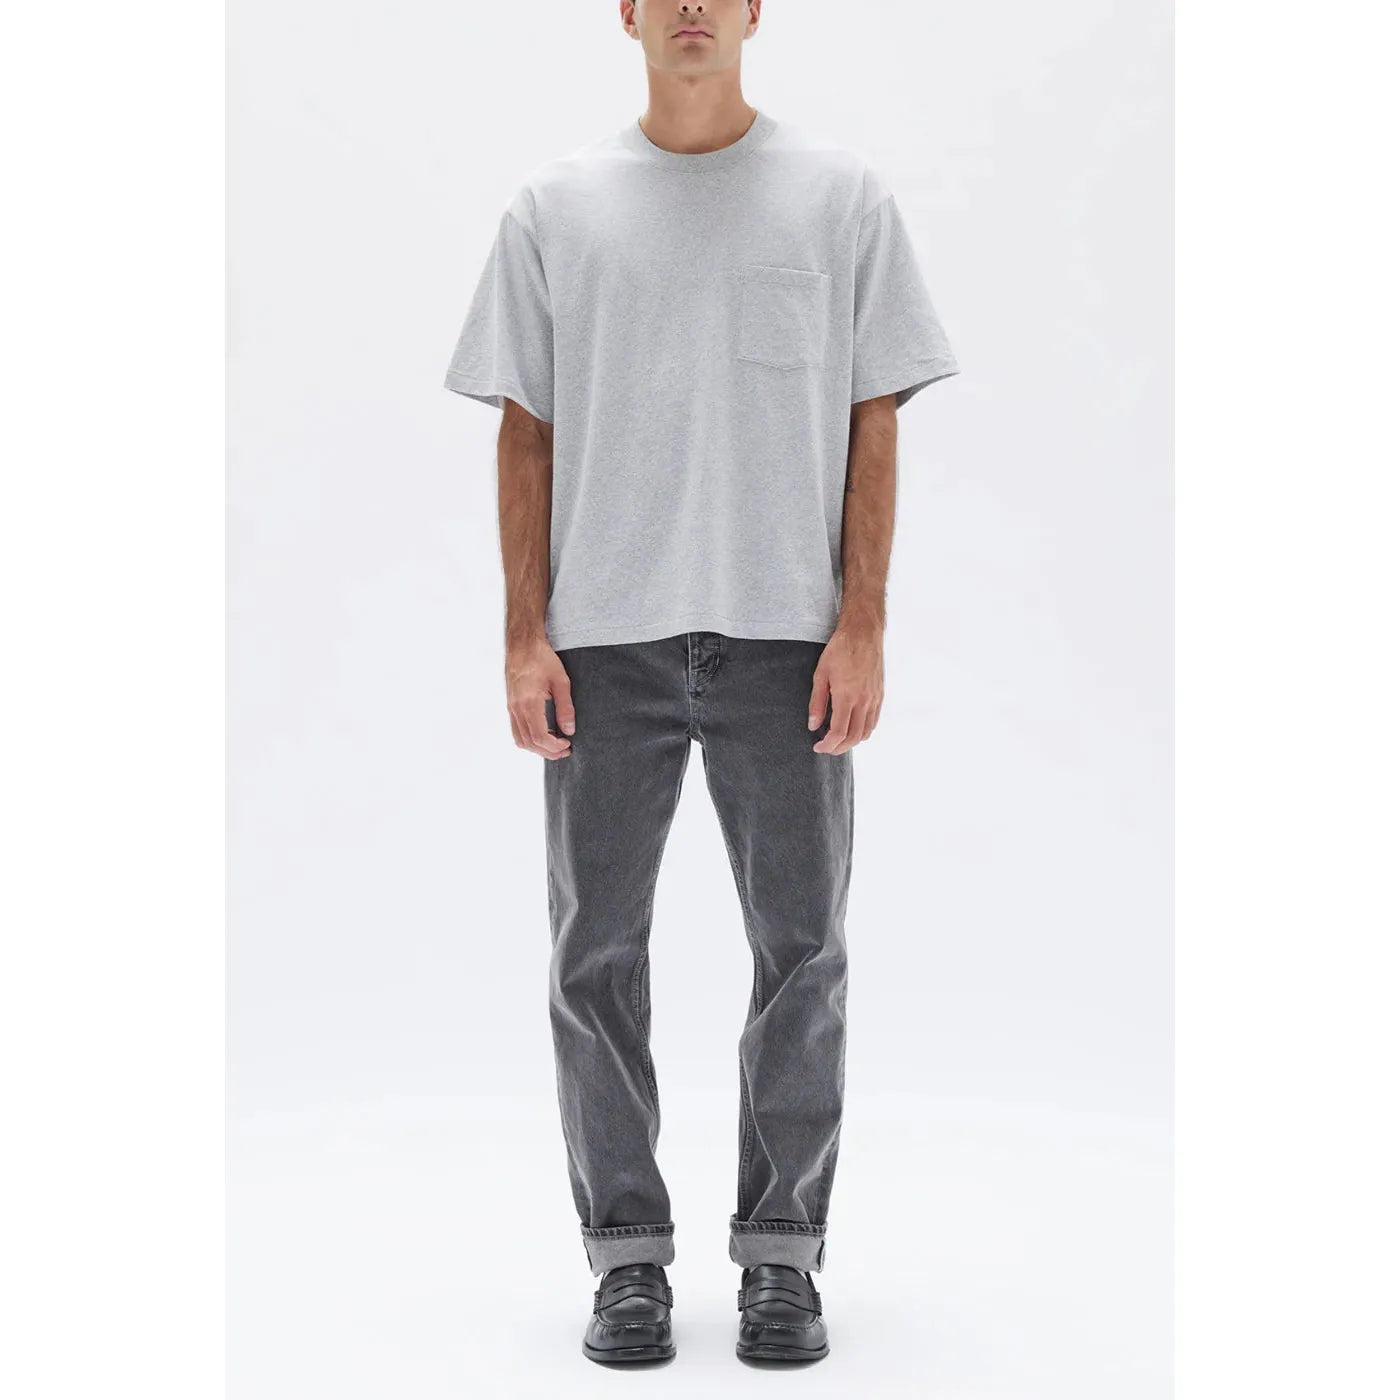 Assembly Label Lucas Cotton Short Sleeve Tee - Grey Marle